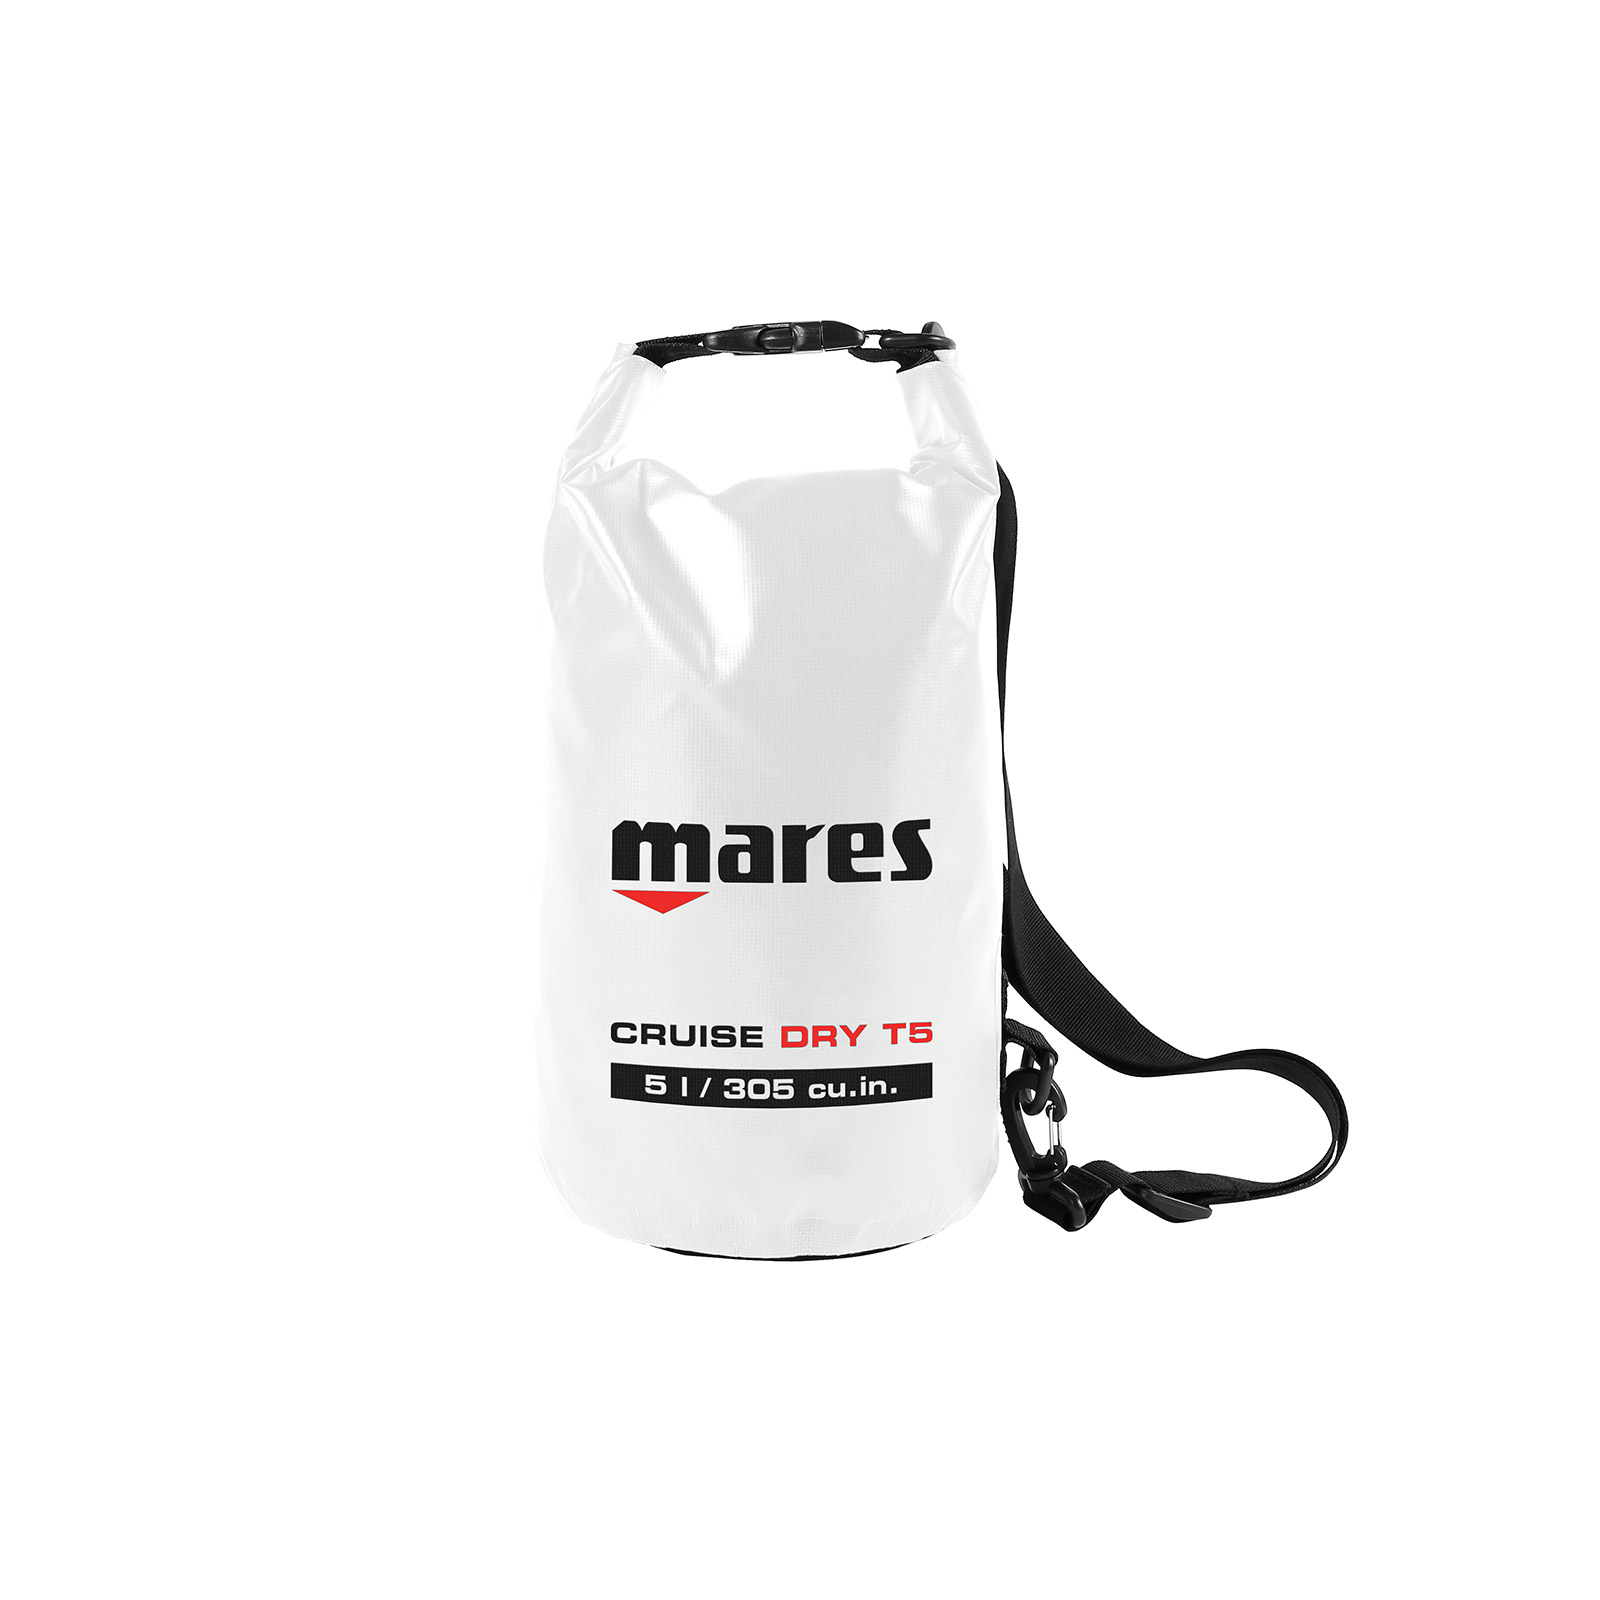 Mares Cruise Dry T5 Bag